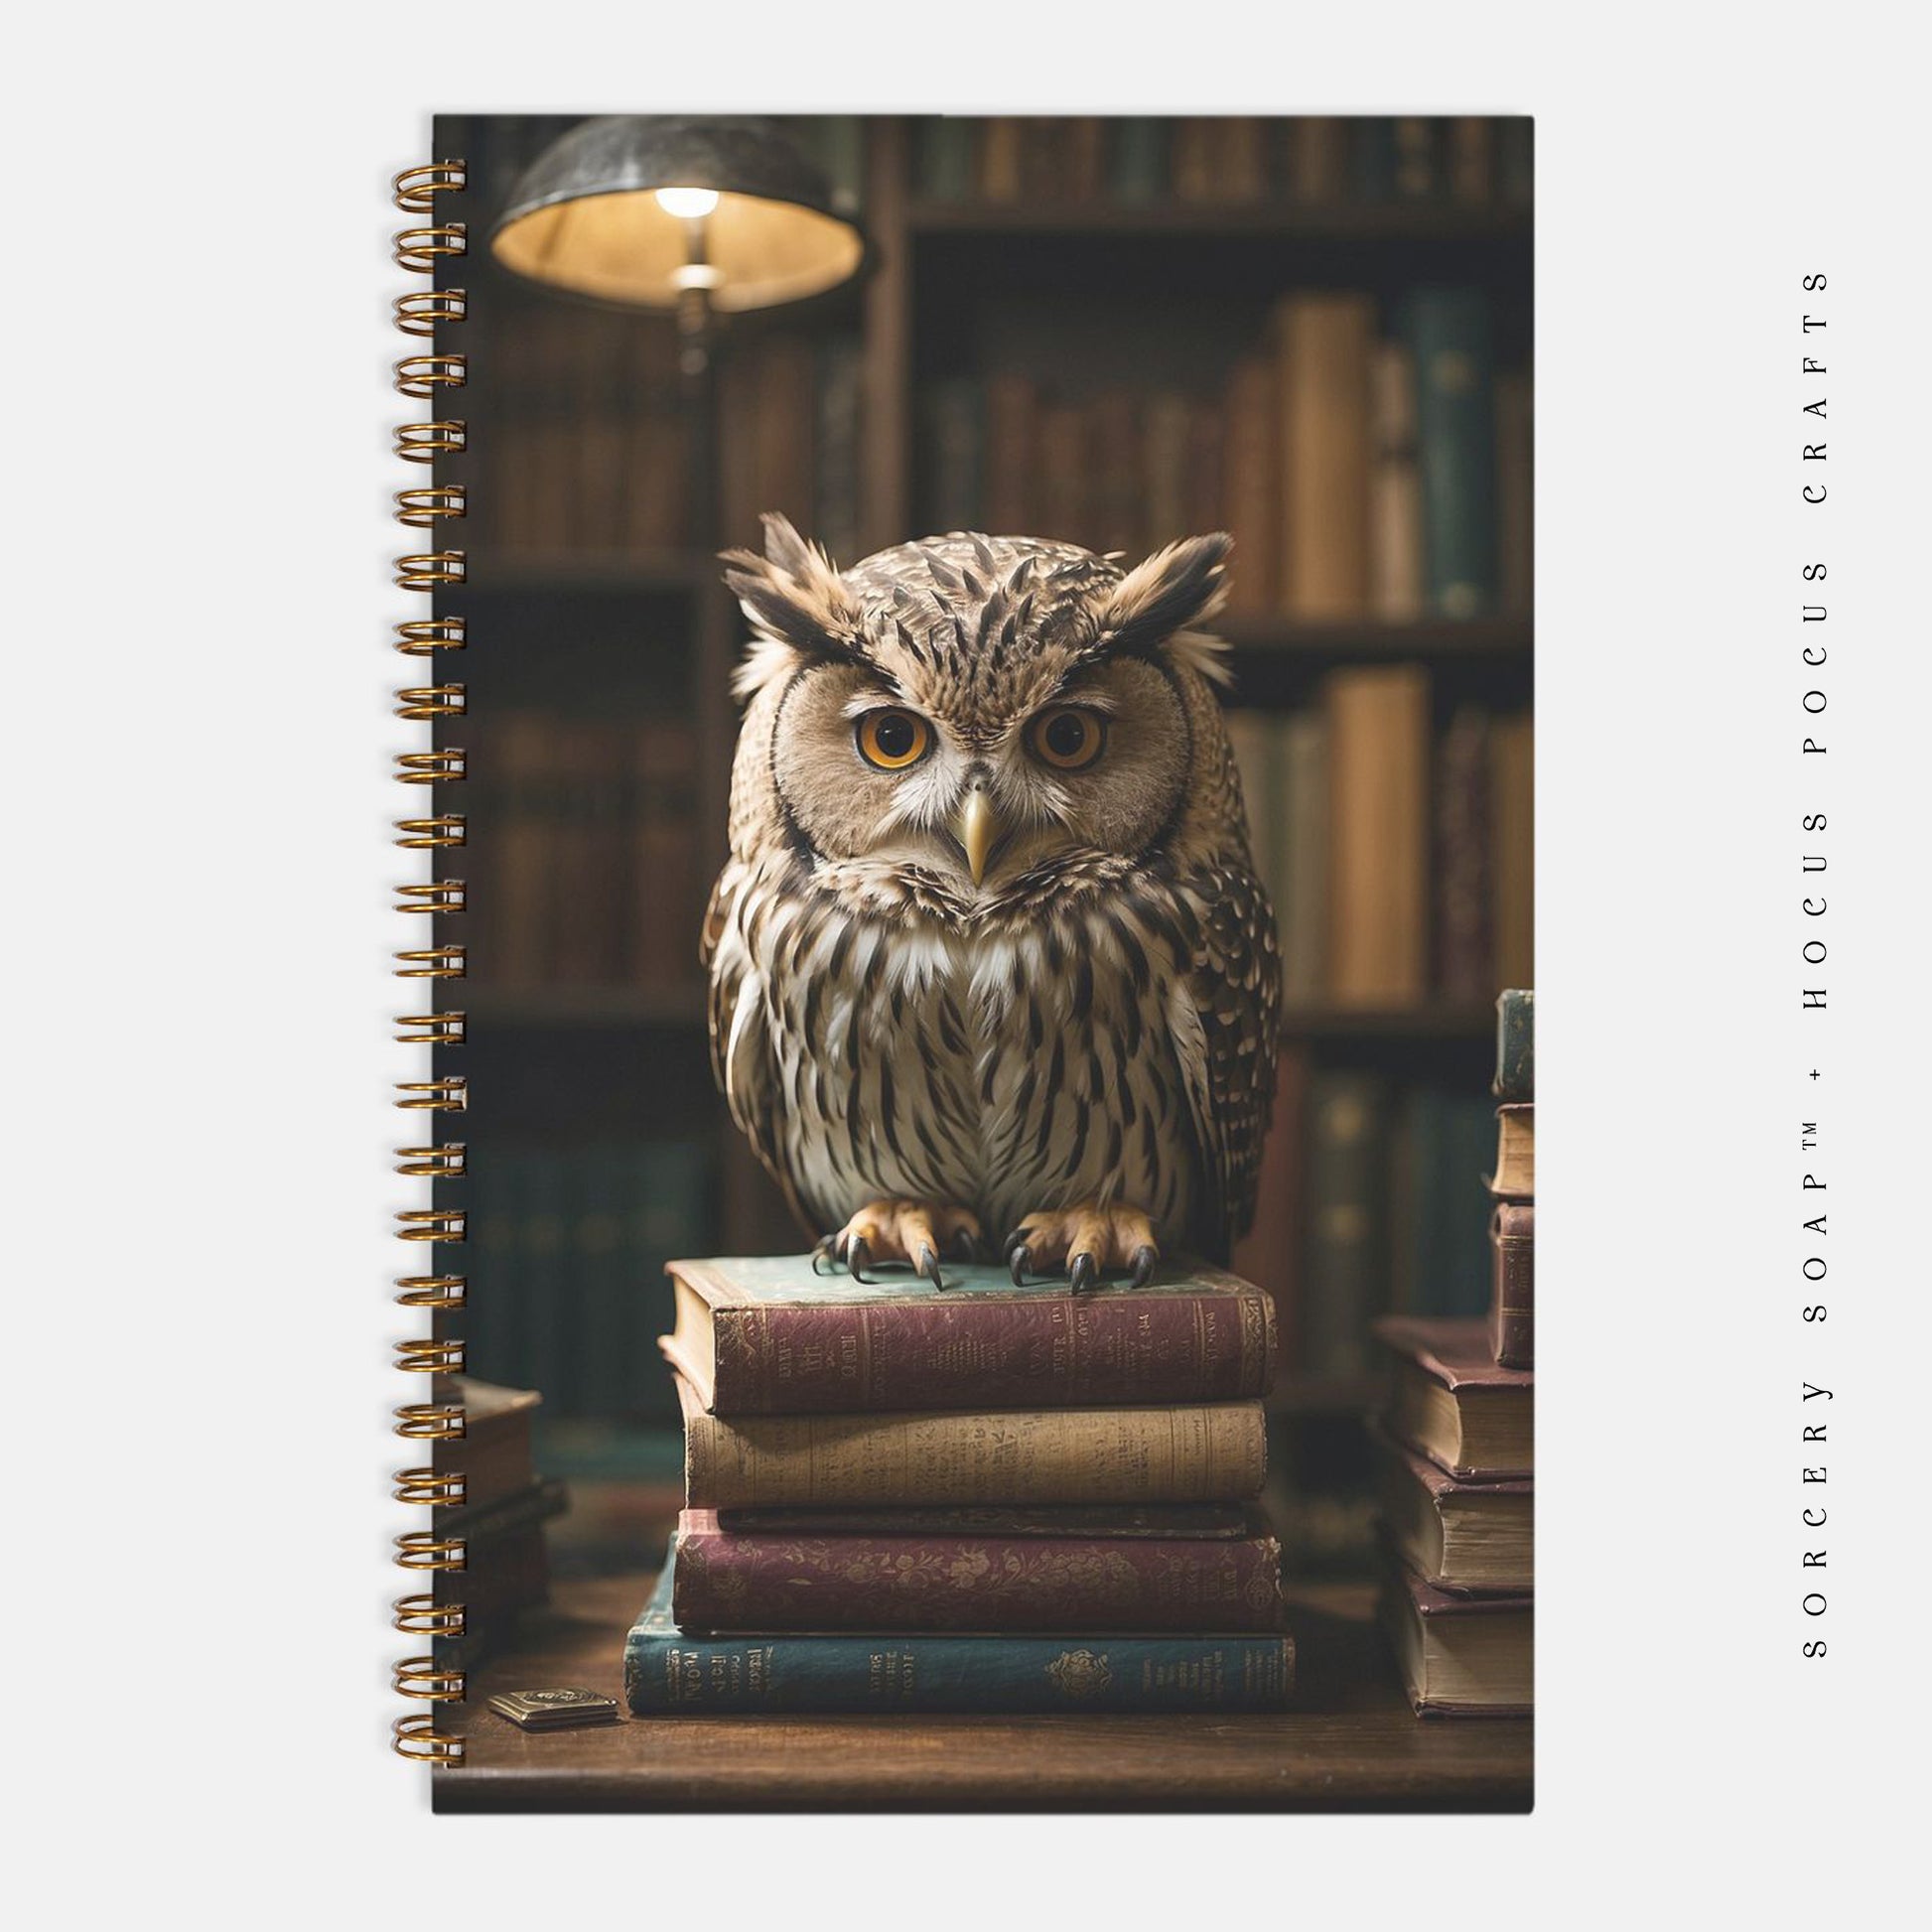 Library Owl Notebook Hardcover Spiral 5.5 x 8.5